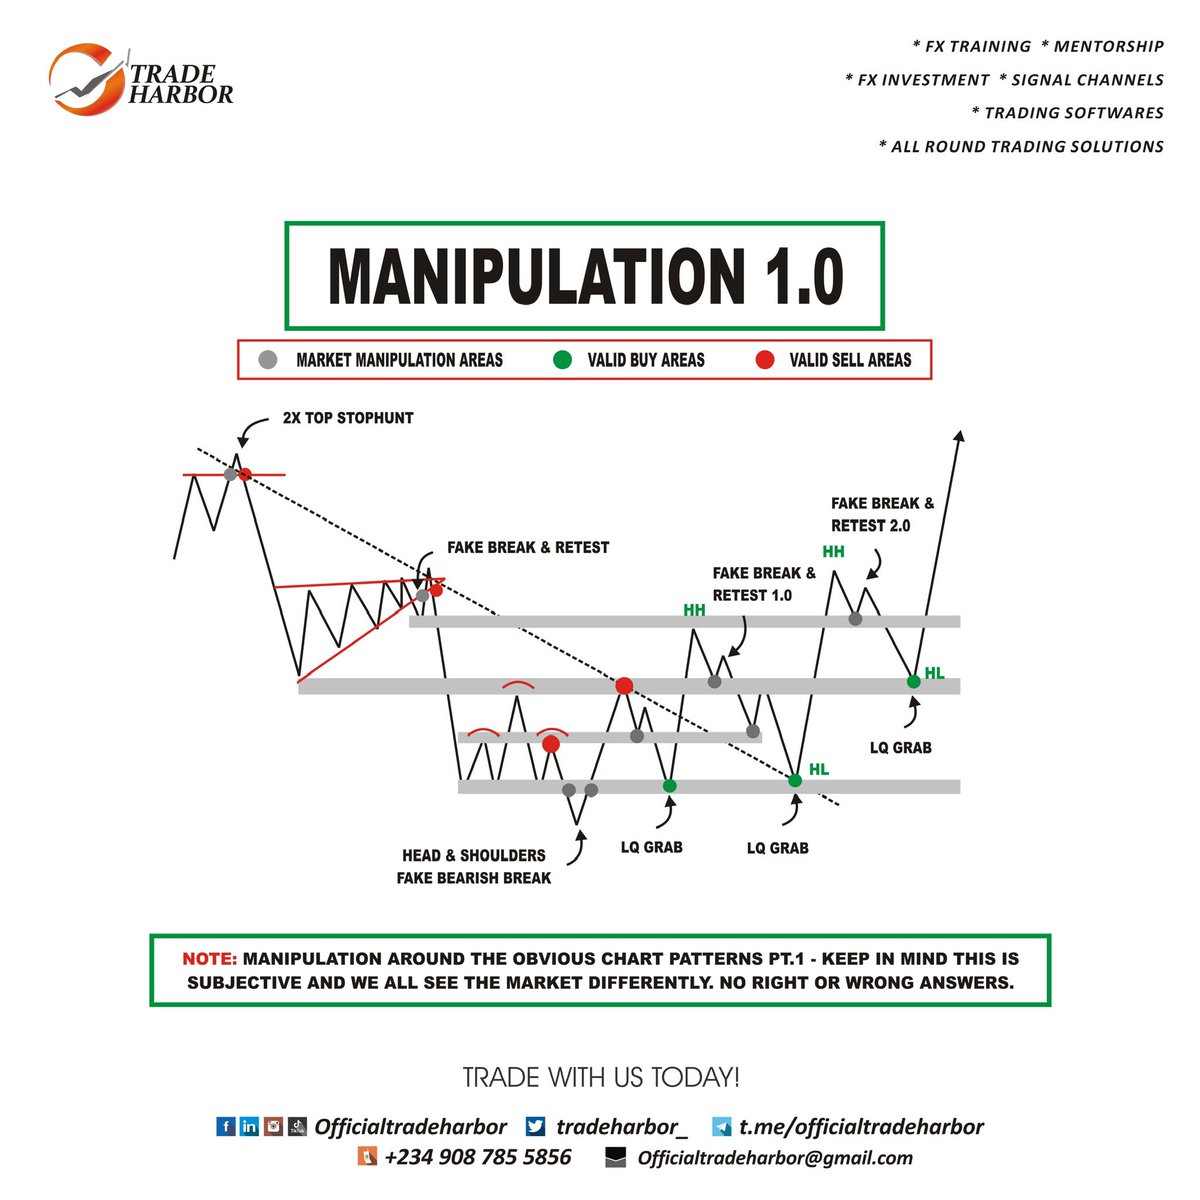 Manipulation 1.0 📊 

#ForexTrading #CurrencyMarkets #ForexAnalysis #FXSignals #TradingStrategy #ForexNews #CurrencyPairs #FXMarket #TradingTips #ForexCommunity #pips